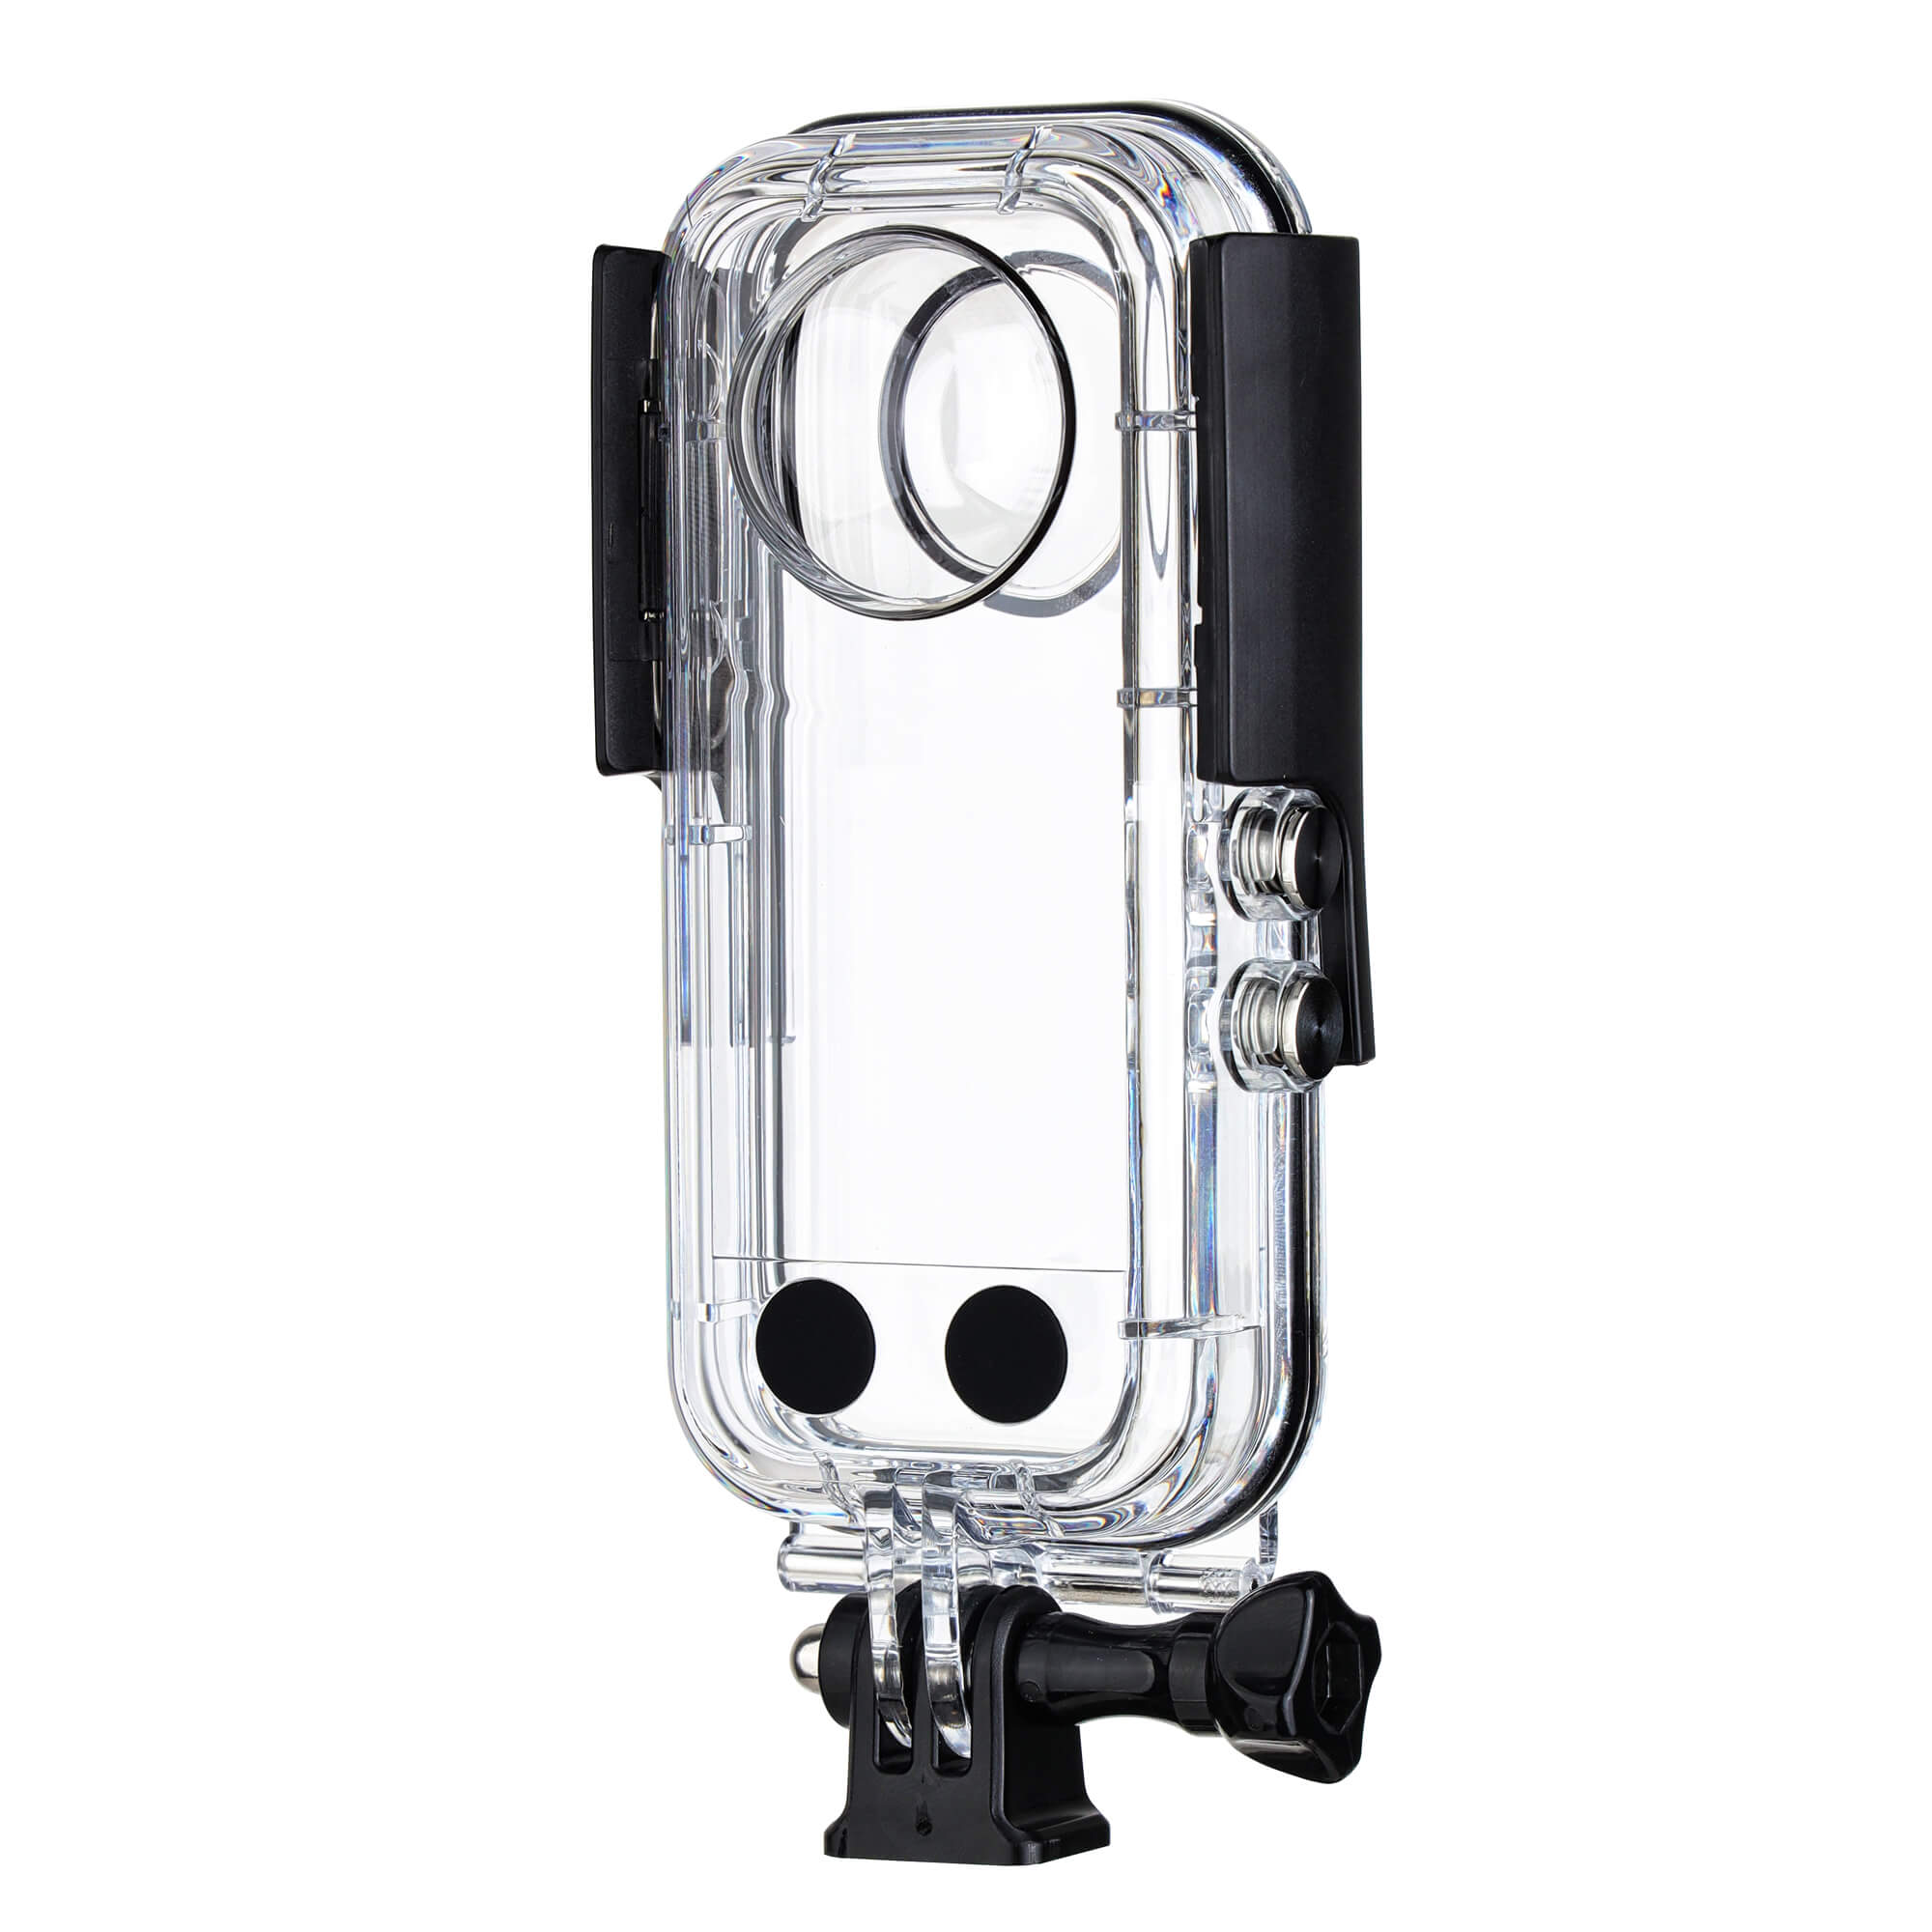 diving case for insta 360 ONE X3 camera